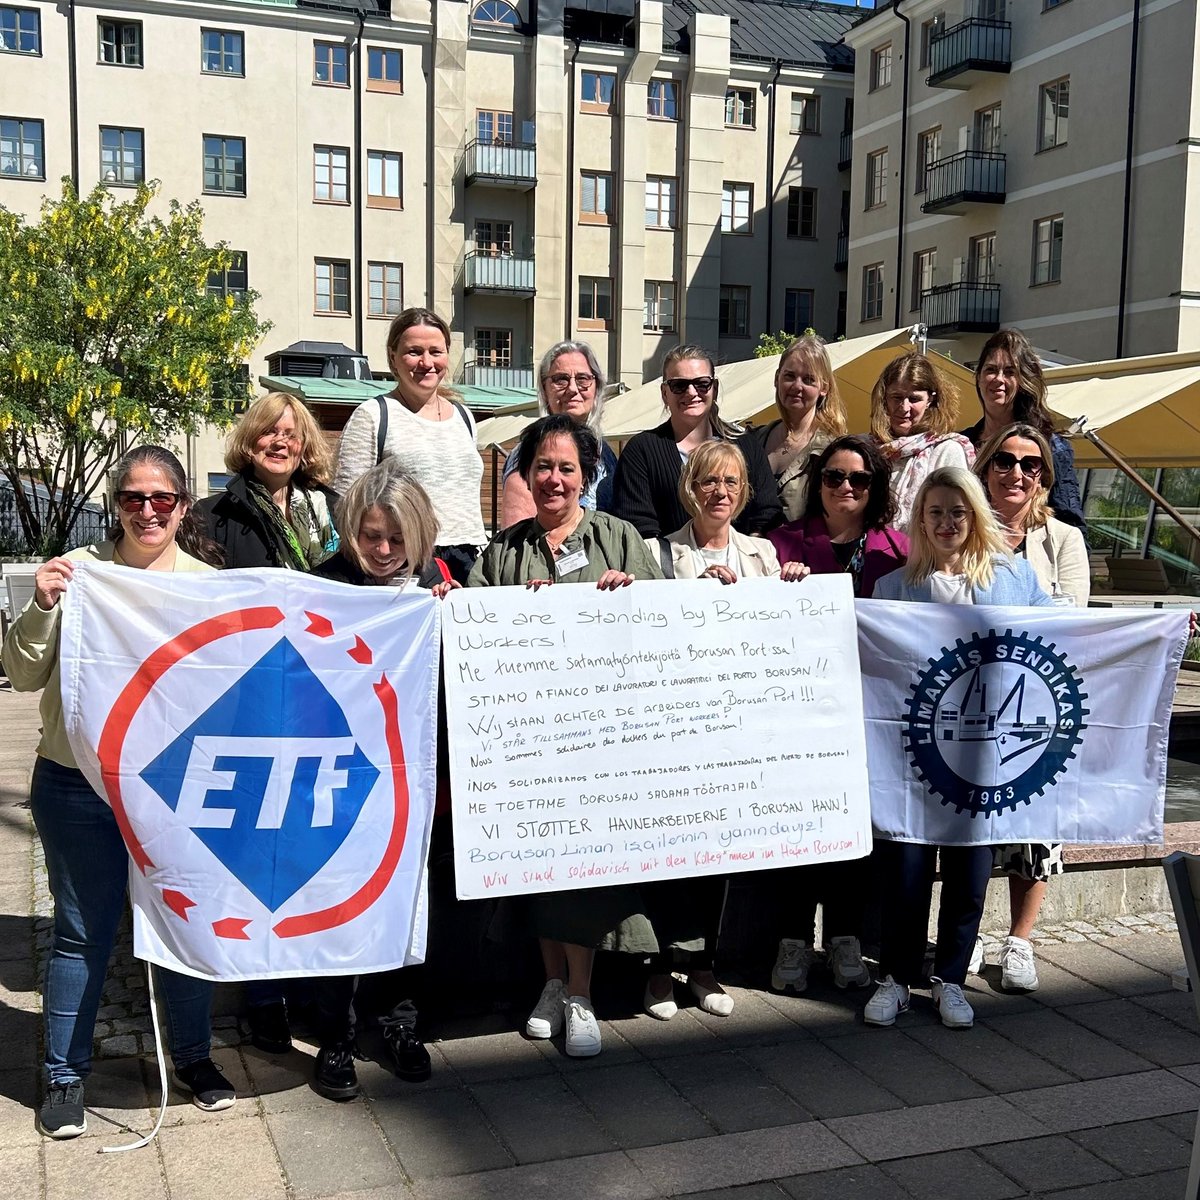 #ETFWomen are in solidarity with Borusan Port workers in Turkey! 

Currently, the company that manages the port has been firing workers who join their union to fight for their rights. This union-busting is illegal in Turkey and elsewhere, as they are a menace to the freedom of